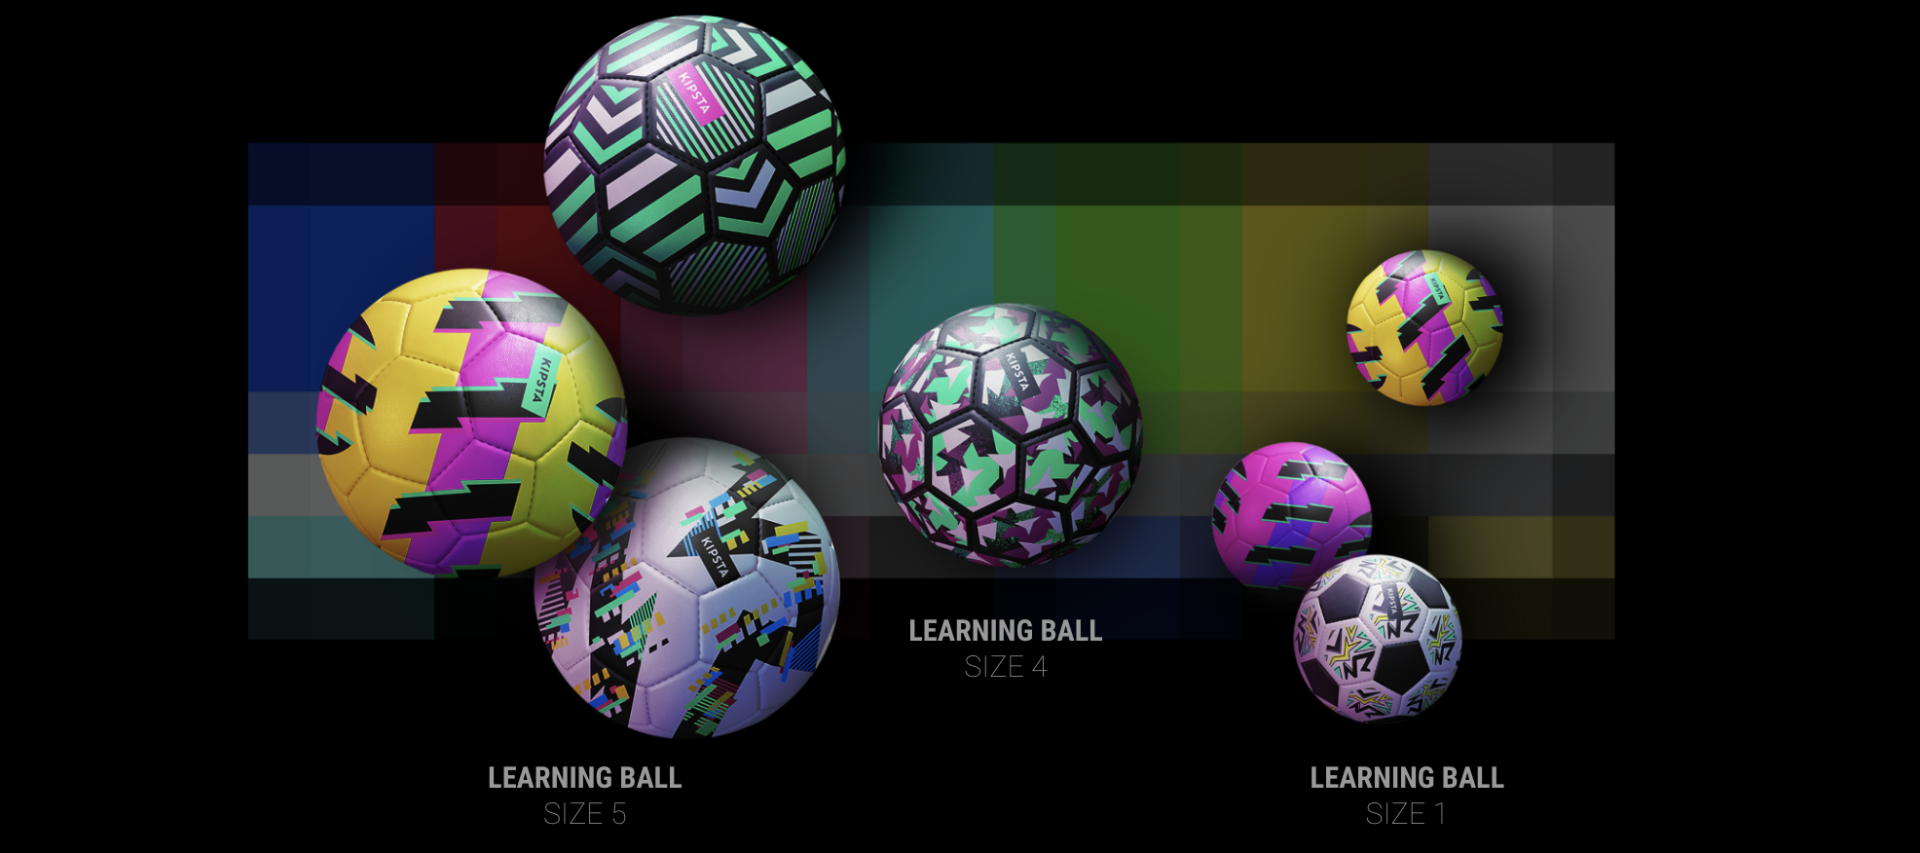 Learning Ball, Learn to aim for the goal without hurting yourself!